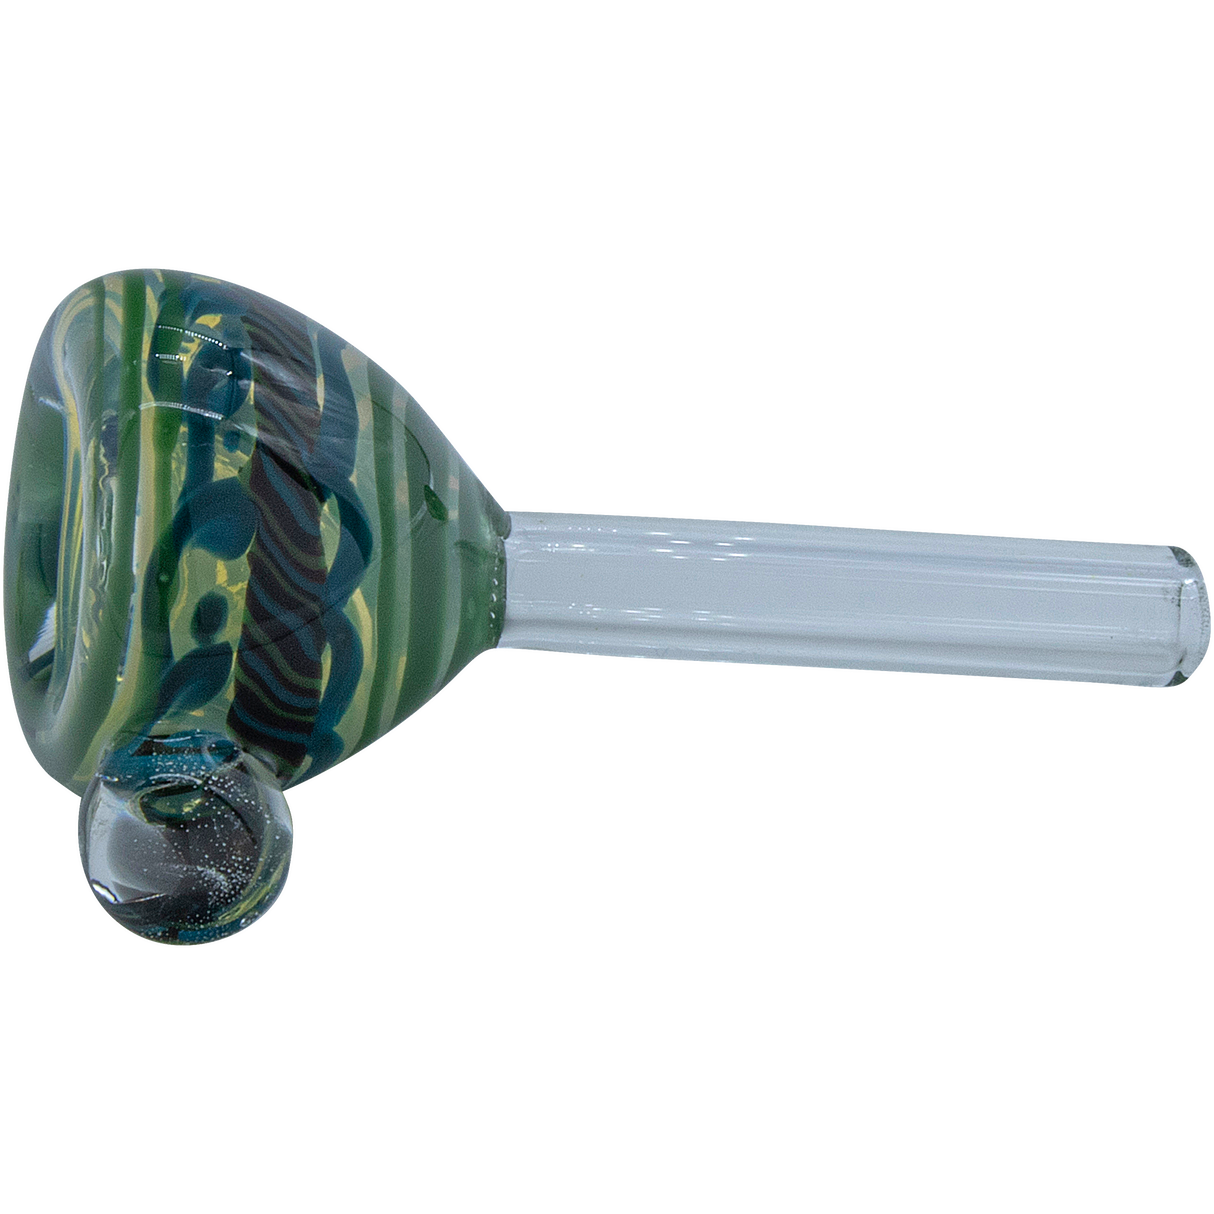 LA Pipes Painted Warrior Pull-Stem Slide Bowl in Green Hues for Bongs, Side View